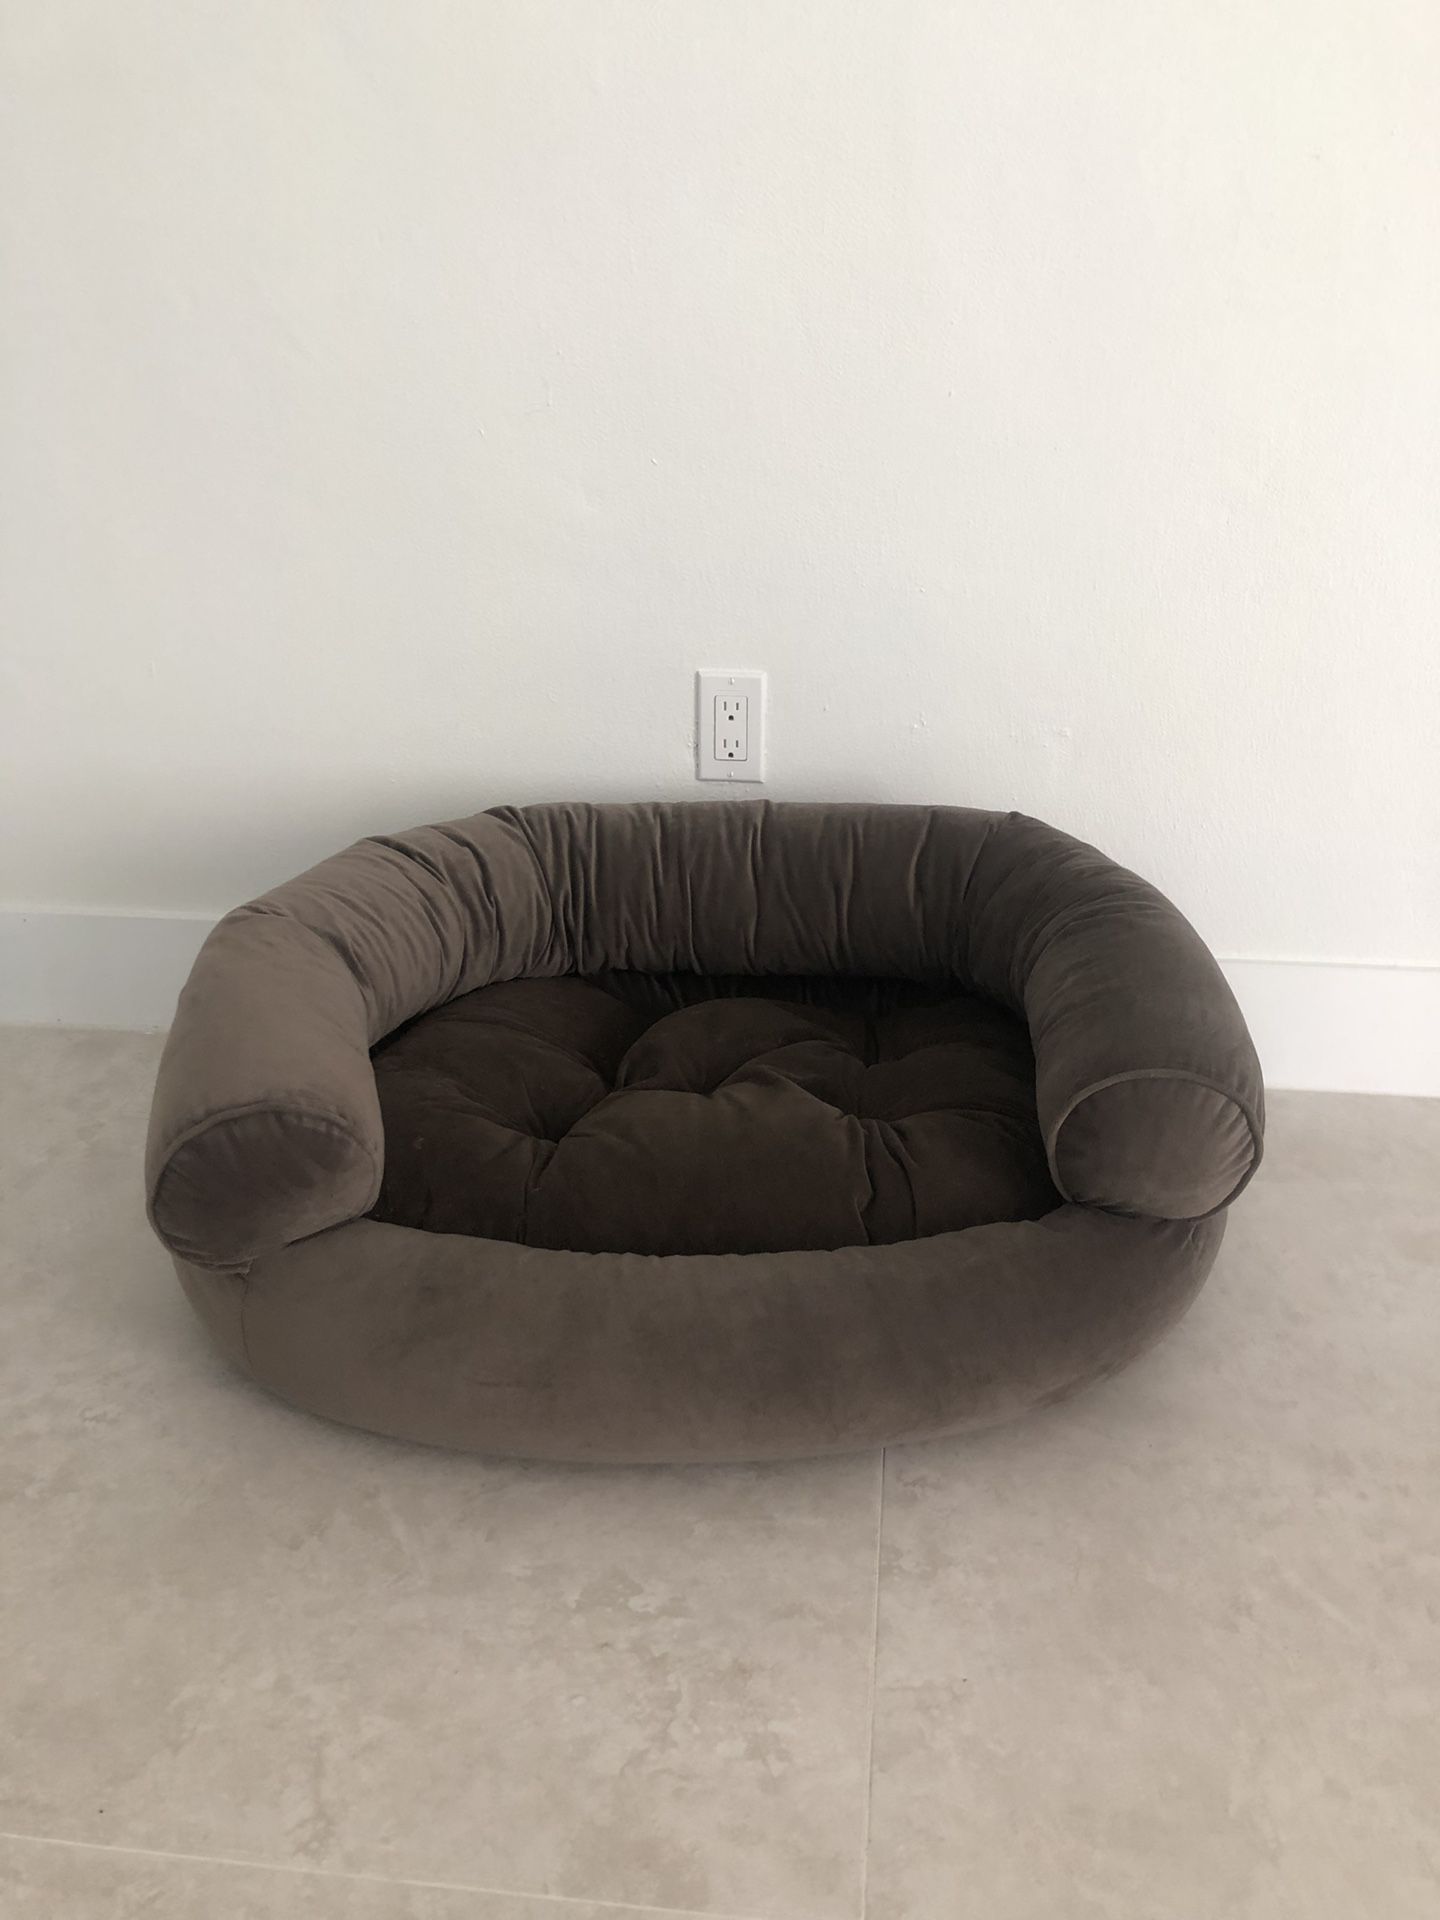 Comfy couch Pet bed